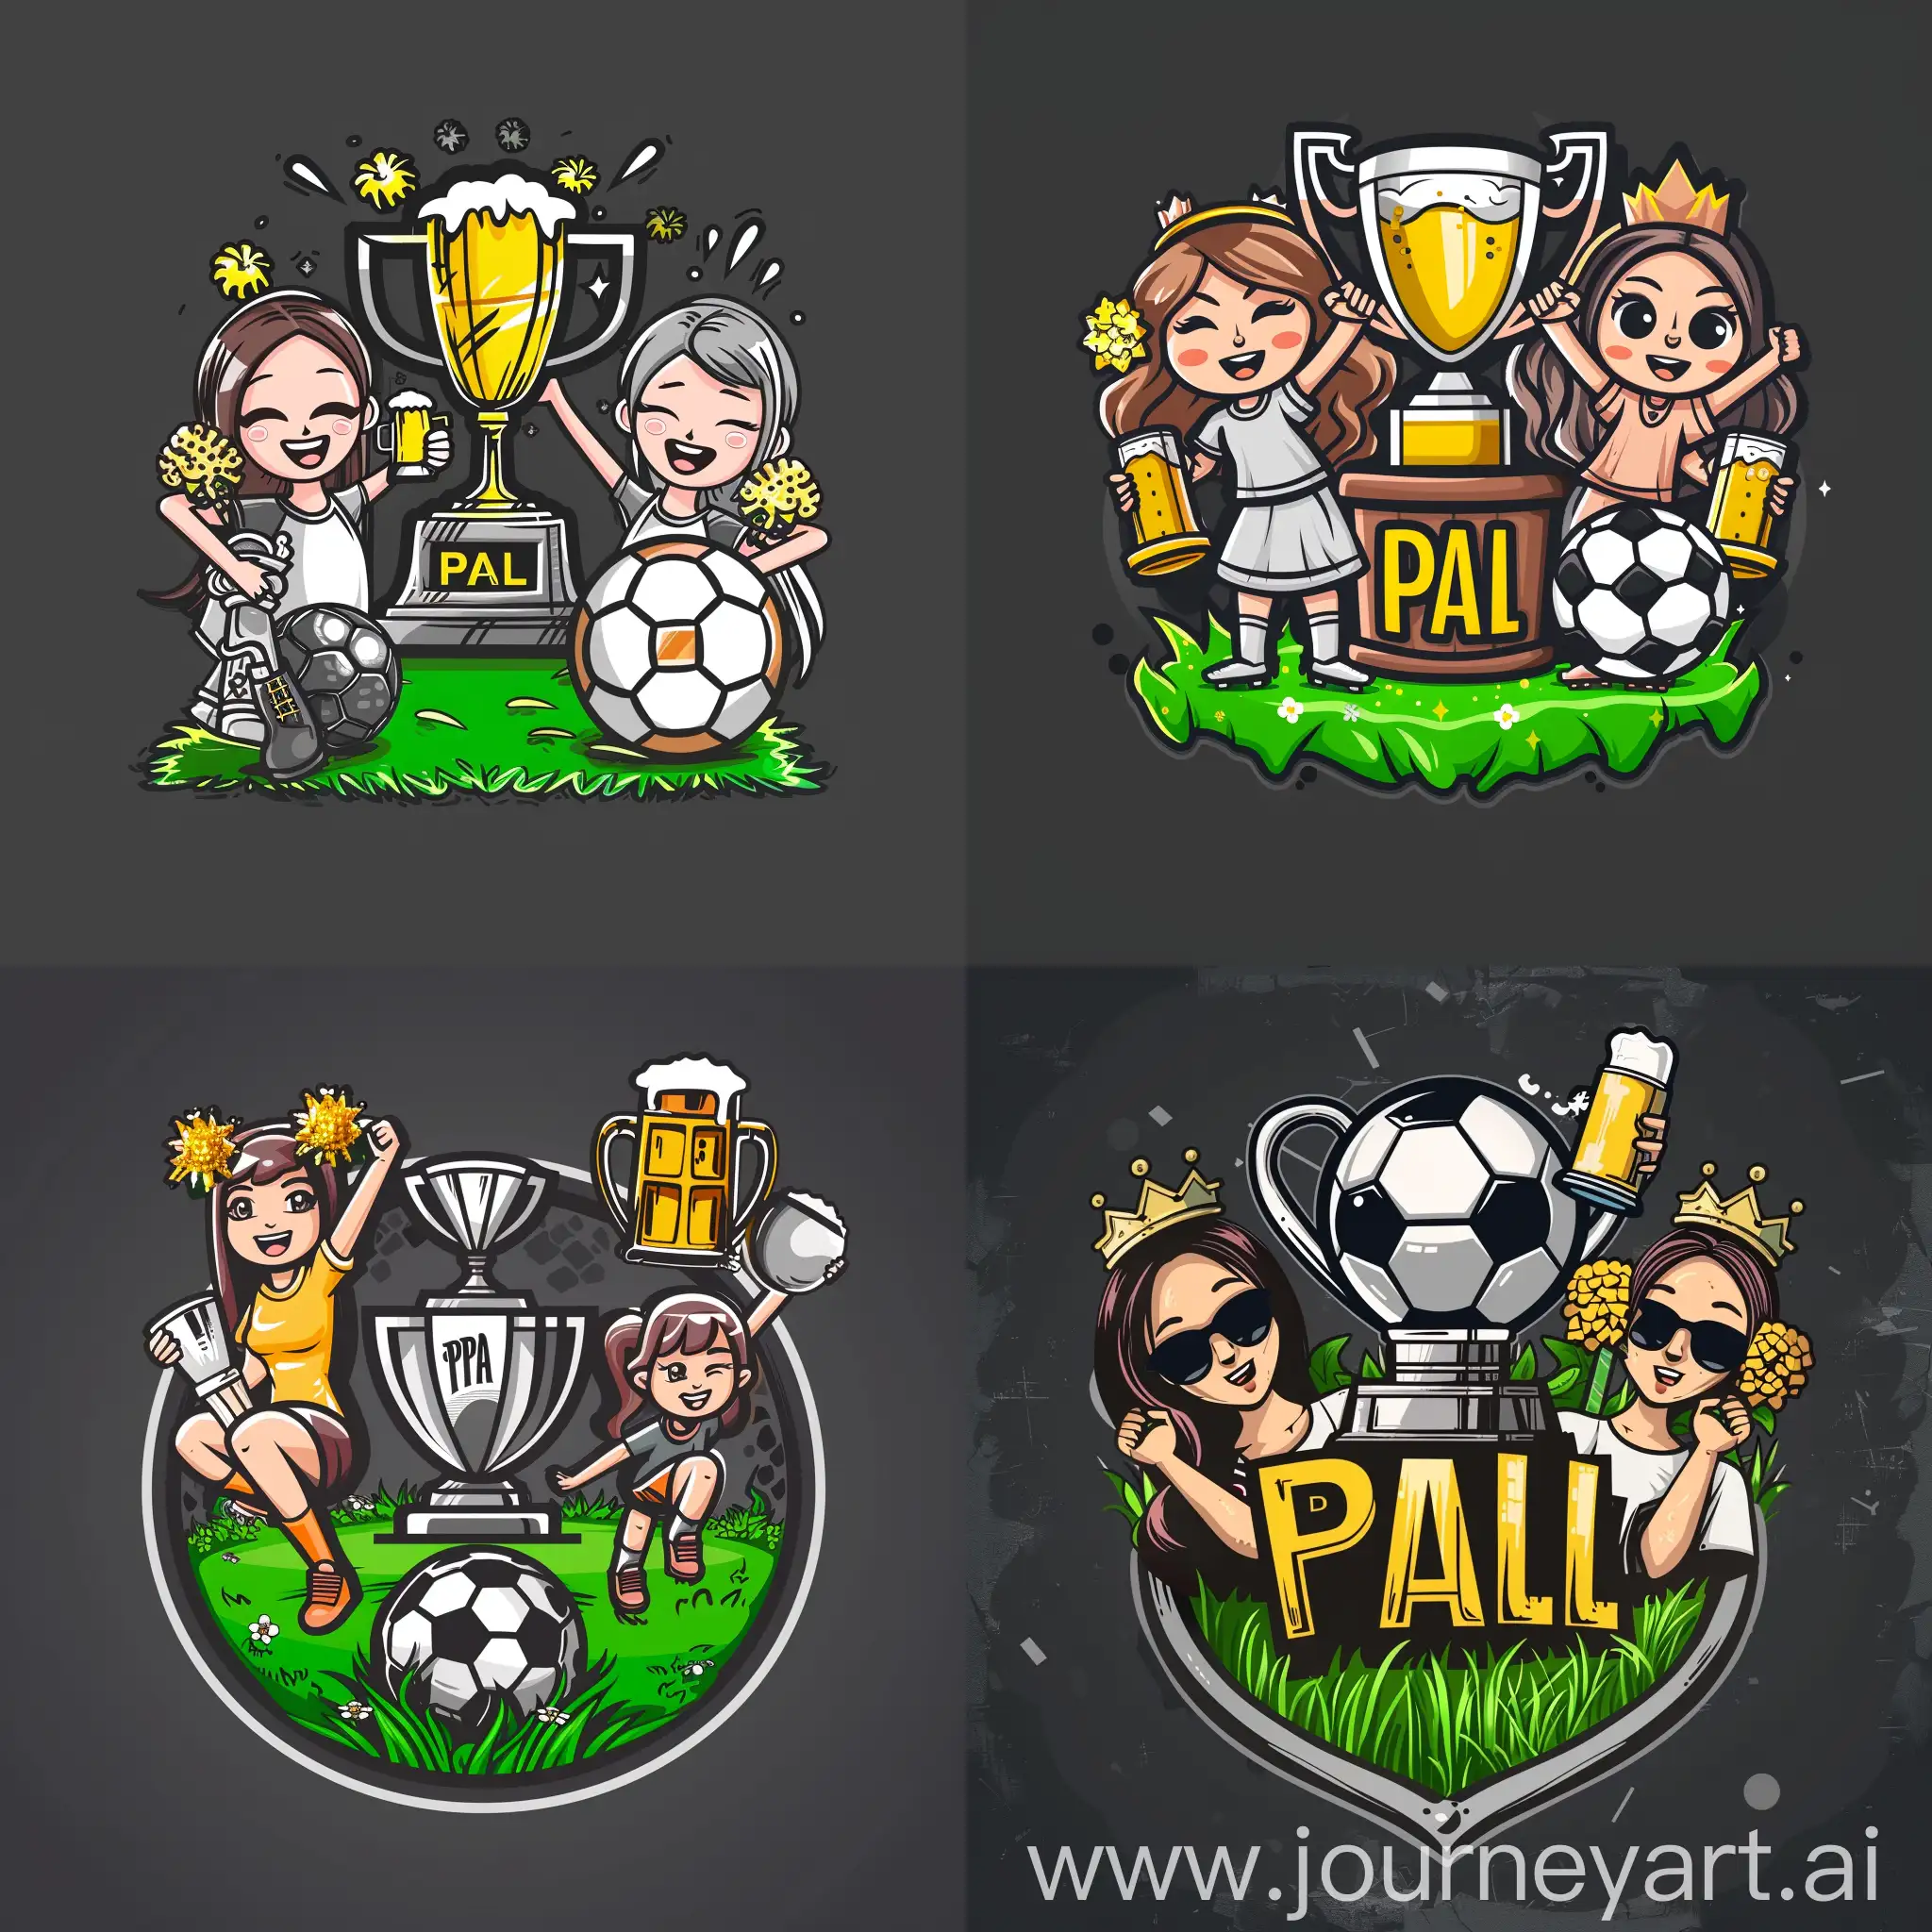 Generate soccer logo, include ball, beer, trophy, green grass, include two cute cheerleaders, dark grey background. Place exact name of the club PAL on logo.